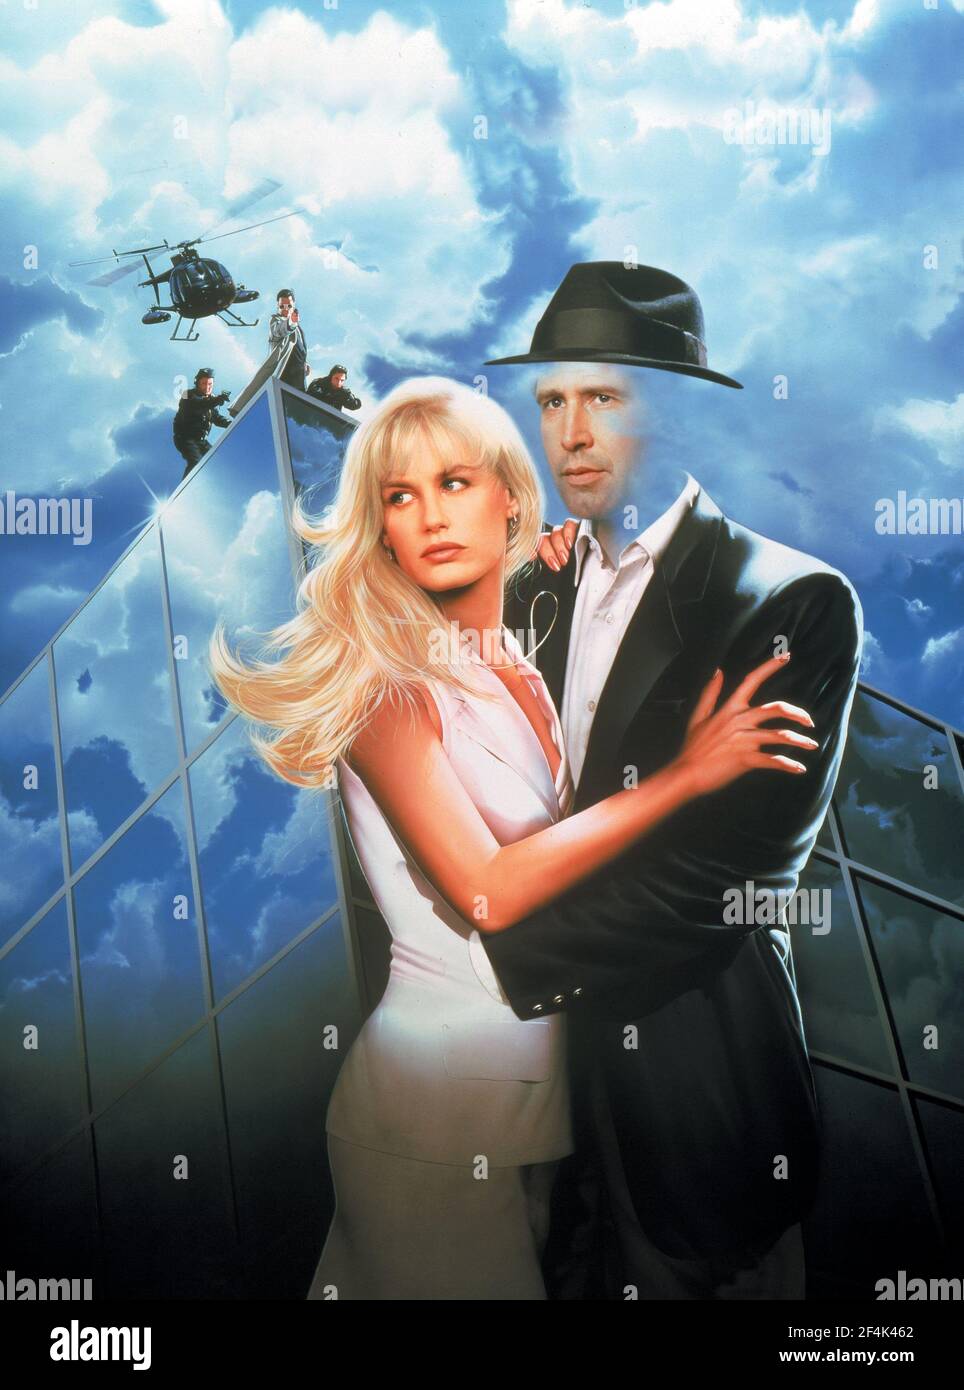 DARYL HANNAH and CHEVY CHASE in MEMOIRS OF AN INVISIBLE MAN (1992), directed by JOHN CARPENTER. Copyright: Editorial use only. No merchandising or book covers. This is a publicly distributed handout. Access rights only, no license of copyright provided. Only to be reproduced in conjunction with promotion of this film. Credit: WARNER BROS/CANAL PLUS/REGENCY/ALCOR / Album Stock Photo